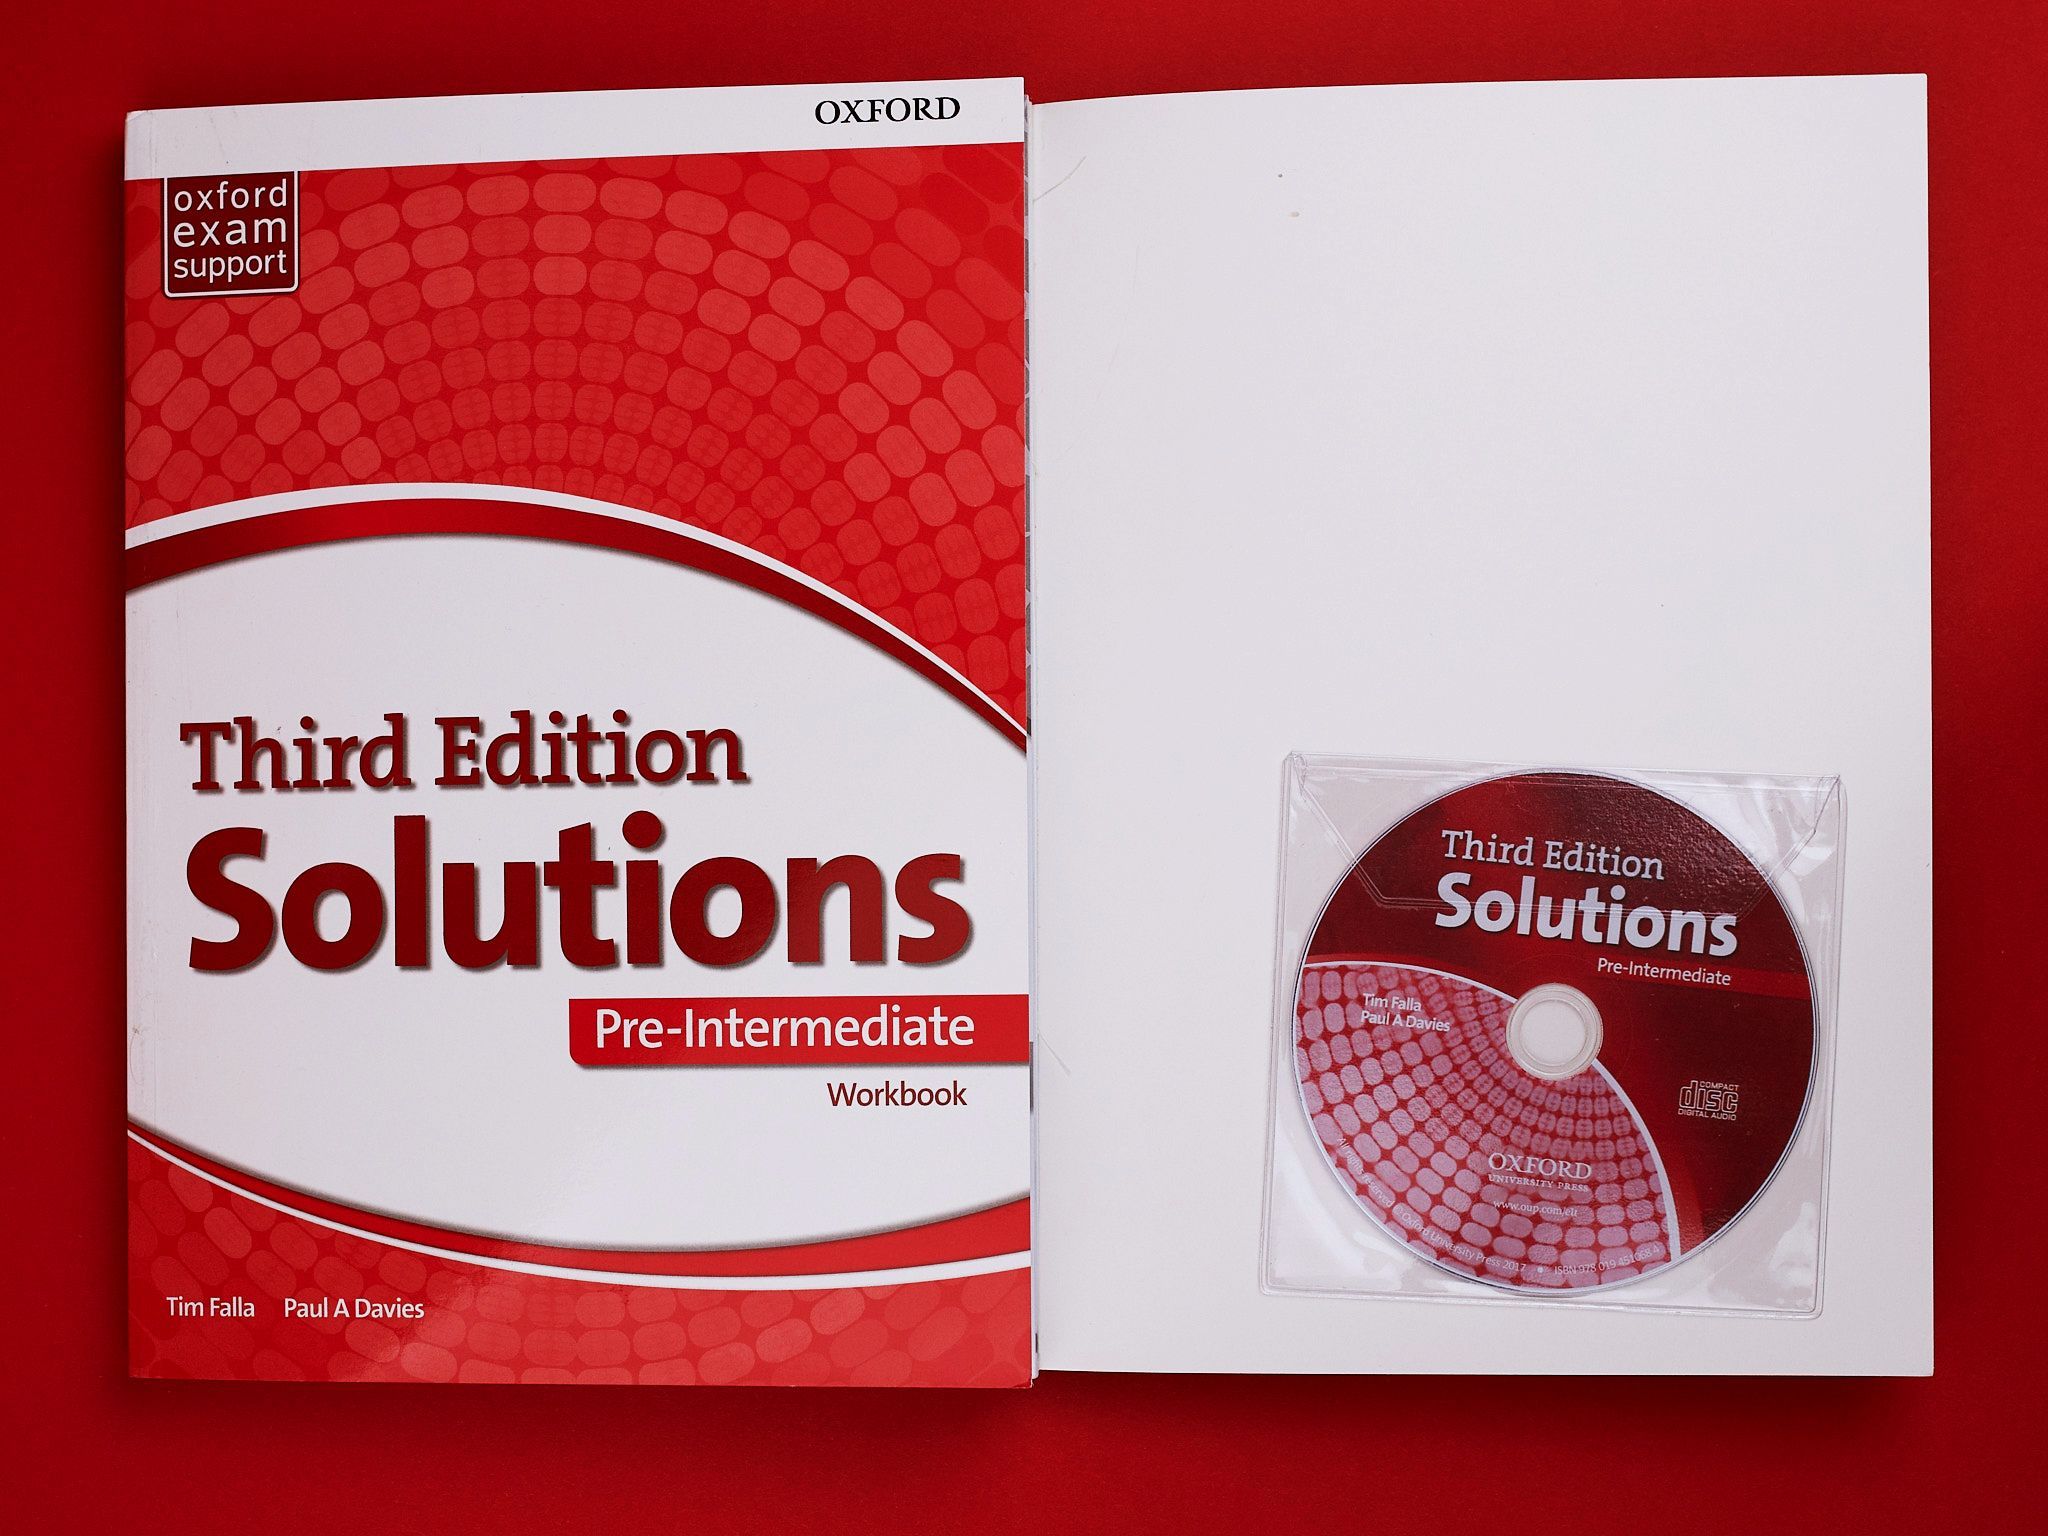 Solutions pre intermediate 3rd edition students book. Solutions: pre-Intermediate. Solutions pre-Intermediate 3rd Edition students book “Grammar Builder”. Solutions pre-Intermediate 3c advertising ppt.